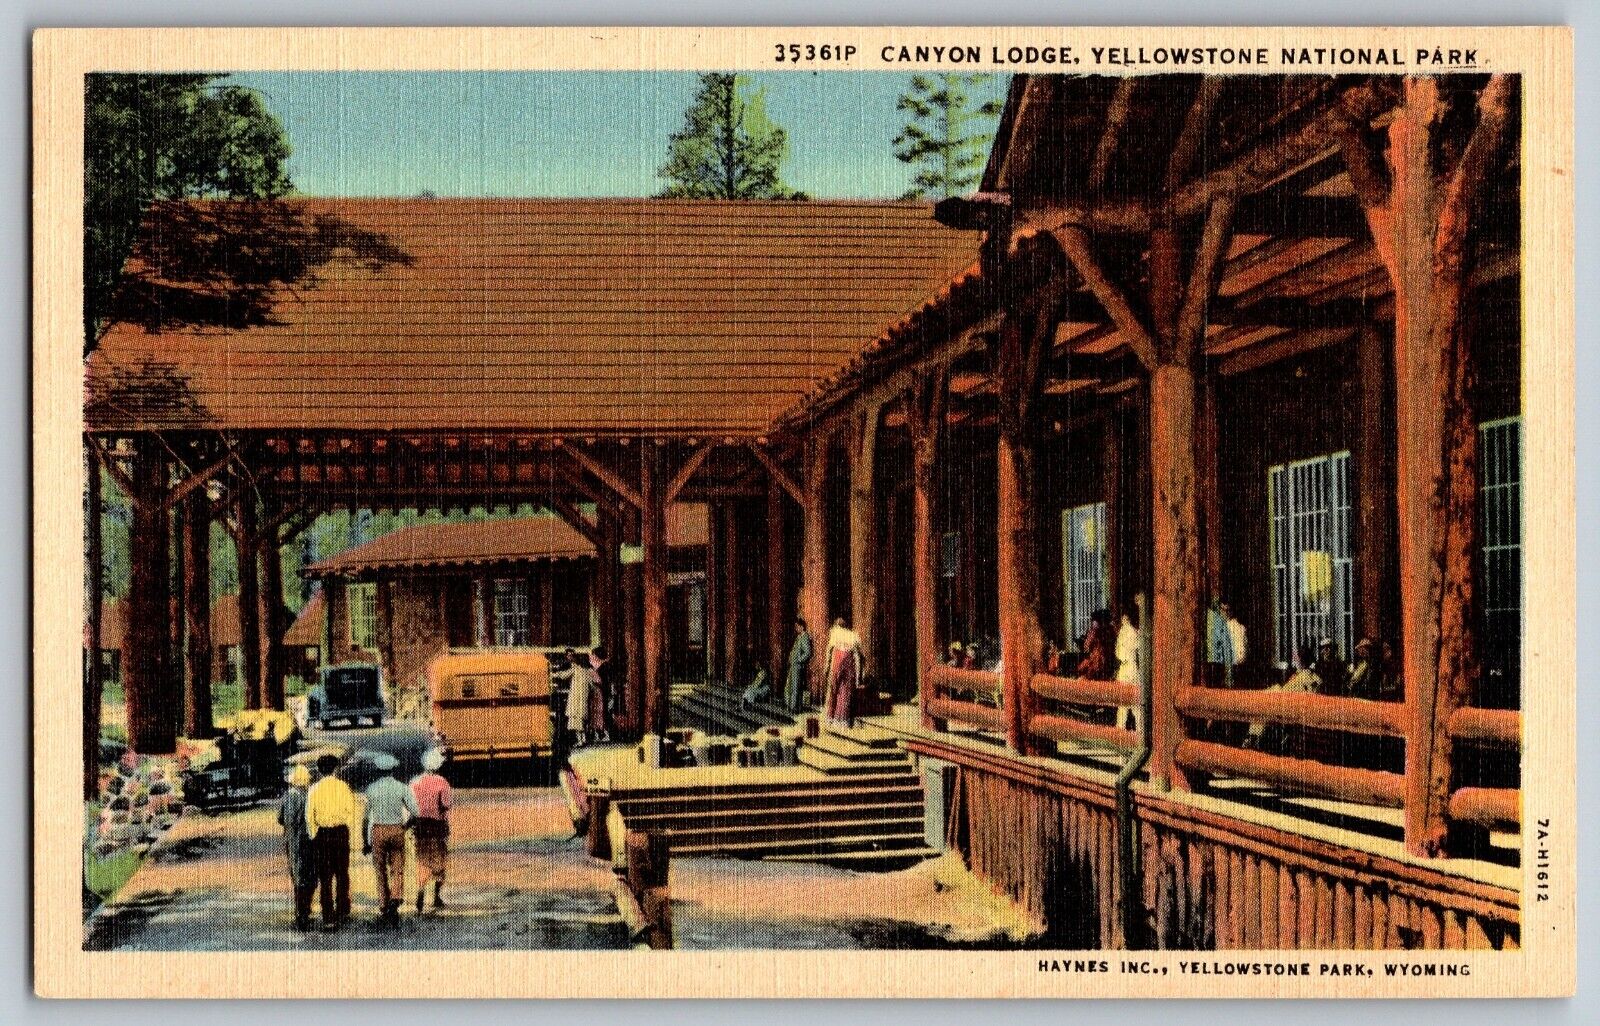 Wyoming Wy - Canyon Lodge - Yellowstone National Park - Vintage Postcard